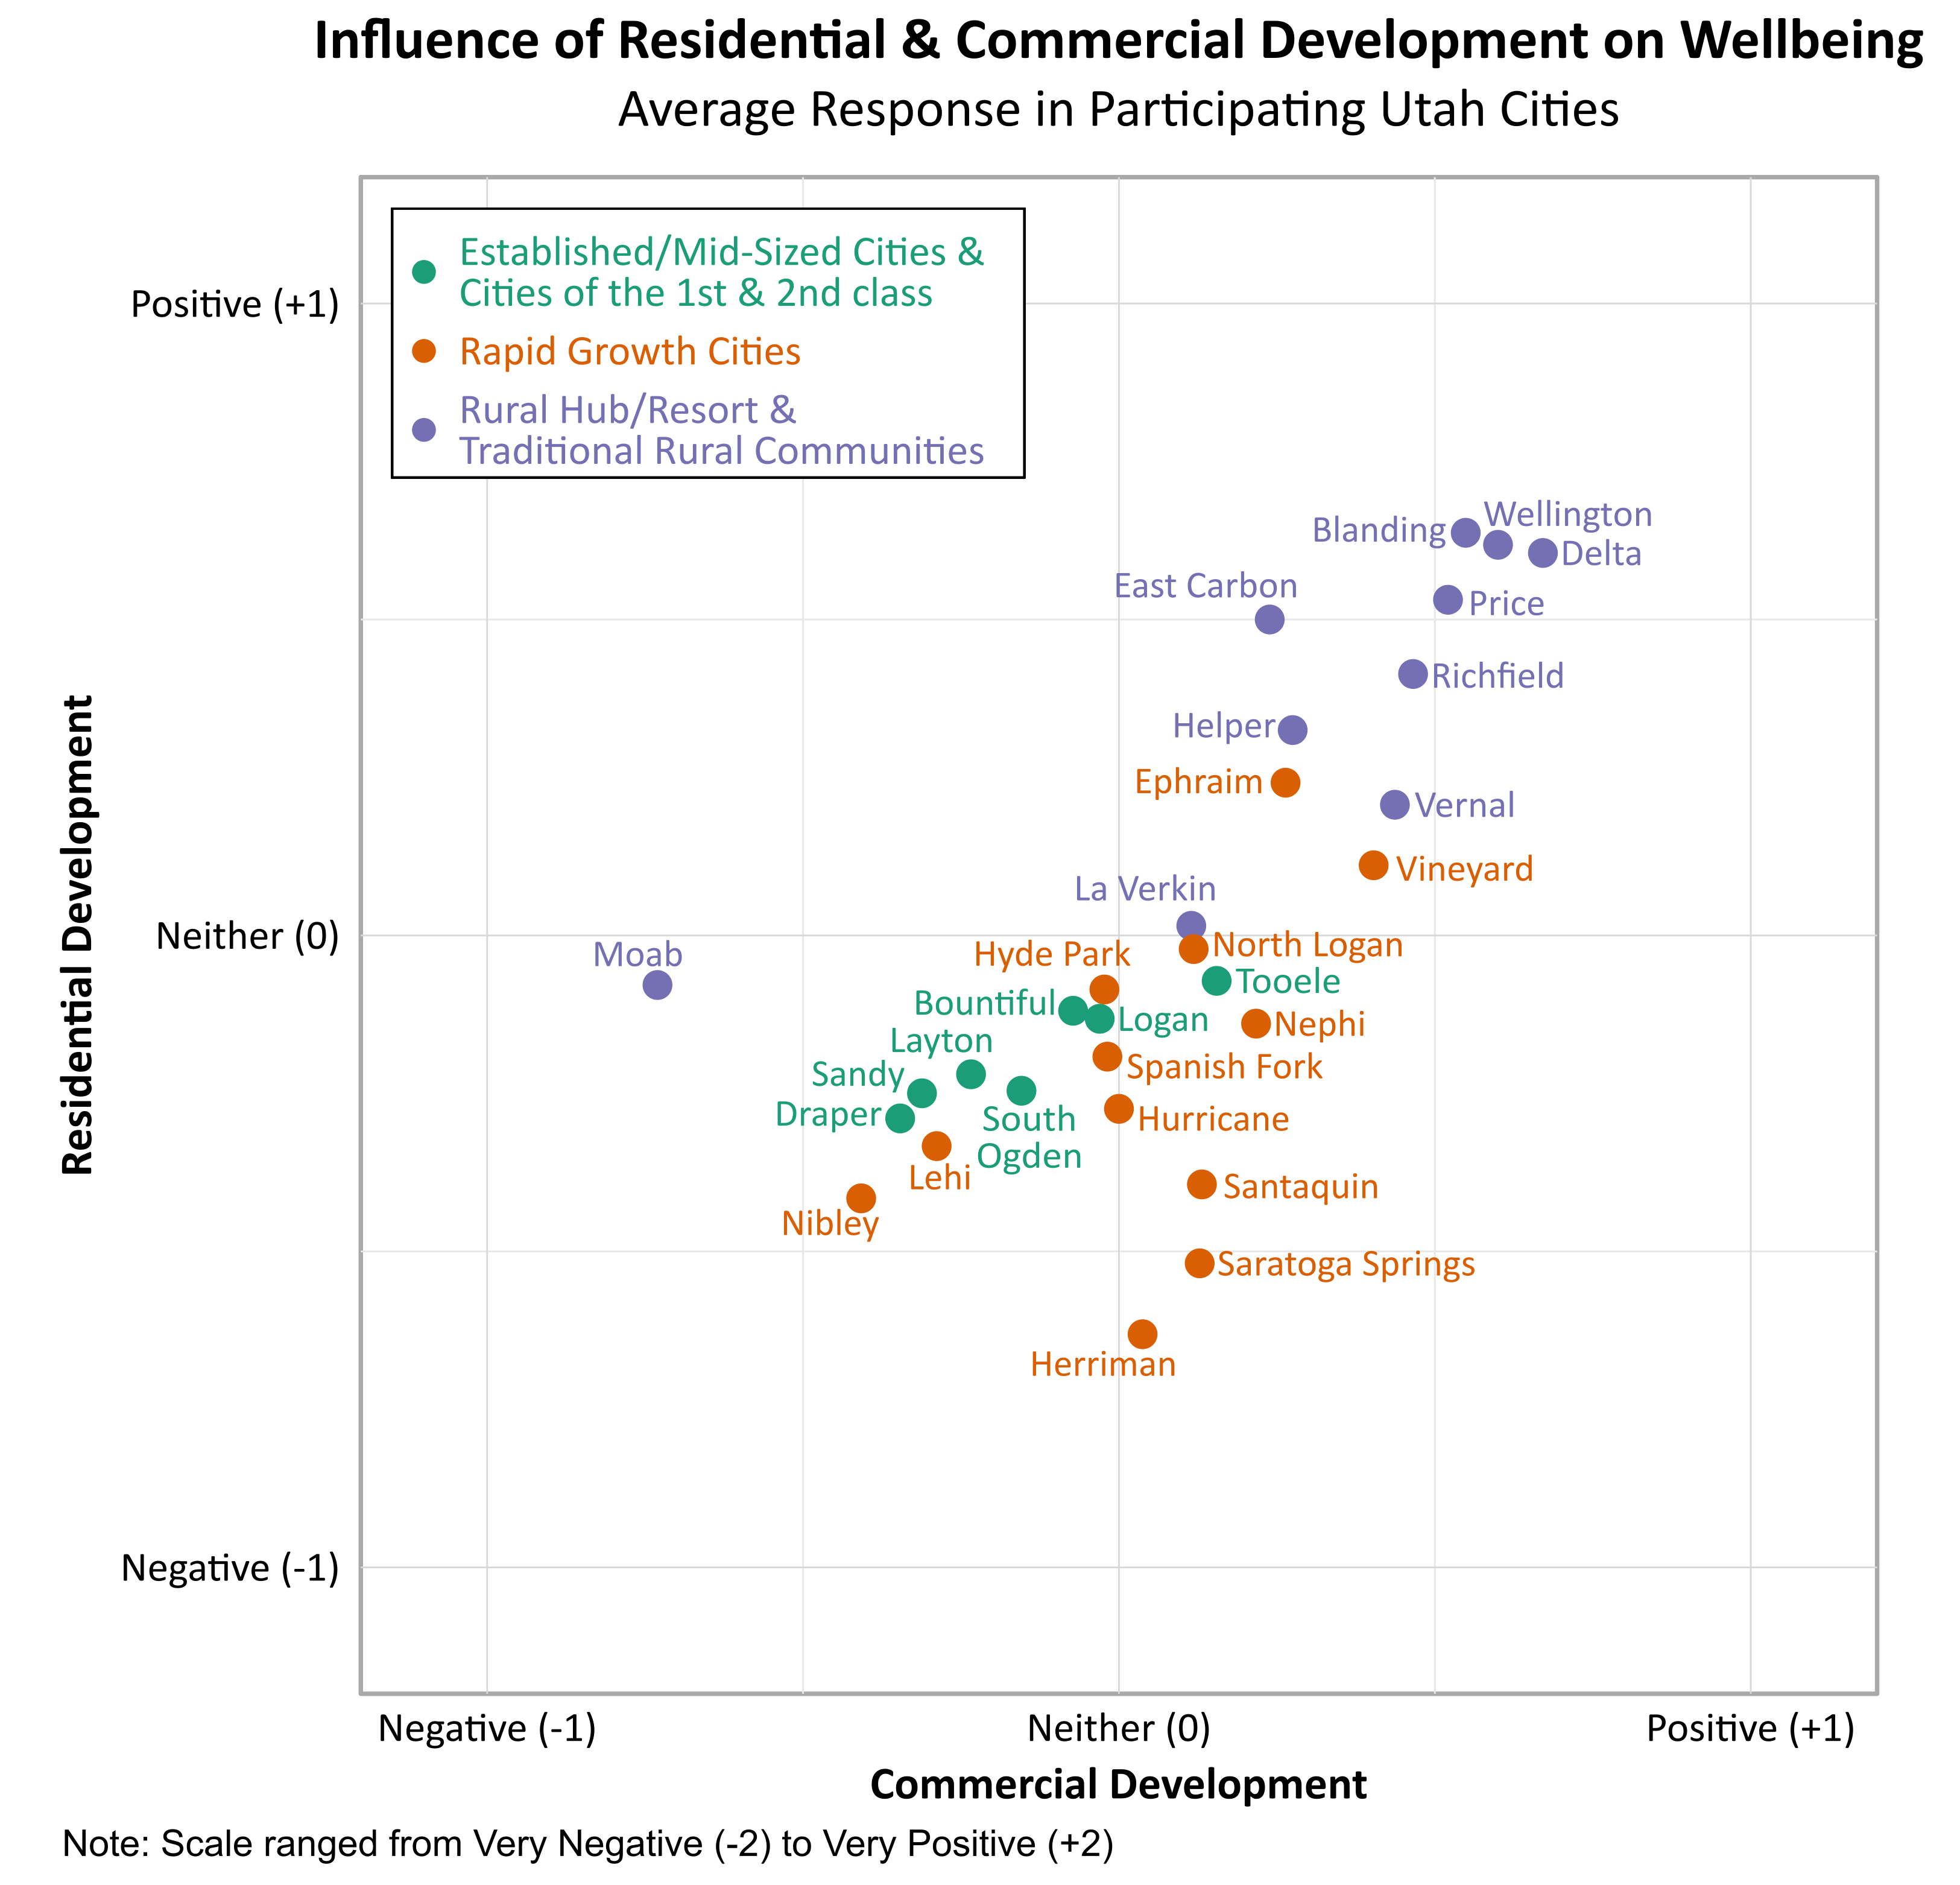 Graph: Scatter Plot. Title: Influence of Residential and Commercial Development on Wellbeing. Subtitle: Average Responses in Participating Utah Cities. (Position on Plot is represented in coordinates where the X- axis is commercial development and y axis is residential development) Category: Established Mid-sized Cities- Draper- (-0.2896, -0.3463); Sandy- (-0.2505, -0.3117); Layton- (-0.2341, -0.2197); South Ogden (-0.1543, -0.2457); Bountiful ( -0.0725, -0.1192); Logan (-0.0304, -0.1318); Tooele (0.1547, -0.0718); Rapid Growth Cities- Nibley (-0.4080, -0.4160); Lehi (-0.2886, -0.3317), Hyde Park (-0.0230, -0.0855); Spanish Fork (-0.0183, -0.1915); Hurricane (0.000, -0.2743); Herriman (0.0374, -0.6310); North Logan (0.1183, -0.0215); Nephi (0.2171, -0.1395); Santaquin (0.1313, -0.3939); Saratoga Springs (0.1278, -0.5188); Ephraim (0.2717, 0.2418); Vineyard (0.4032, 0.1111); Rural Hub/Resort and Traditional Rural communities- Moab (-0.7304, -0.0784), La Verkin (0.1145, 0.0153); Helper (0.2750, 0.3250); East Carbon (0.2386, 0.5000); Vernal (0.4368, 0.2069); Richfield (0.4655, 0.4138), Price (0.5208, 0.5313); Blanding (0.5488, 0.6389); Wellington (0.6000, 0.6182); Delta (0.6711, 0.6053). 